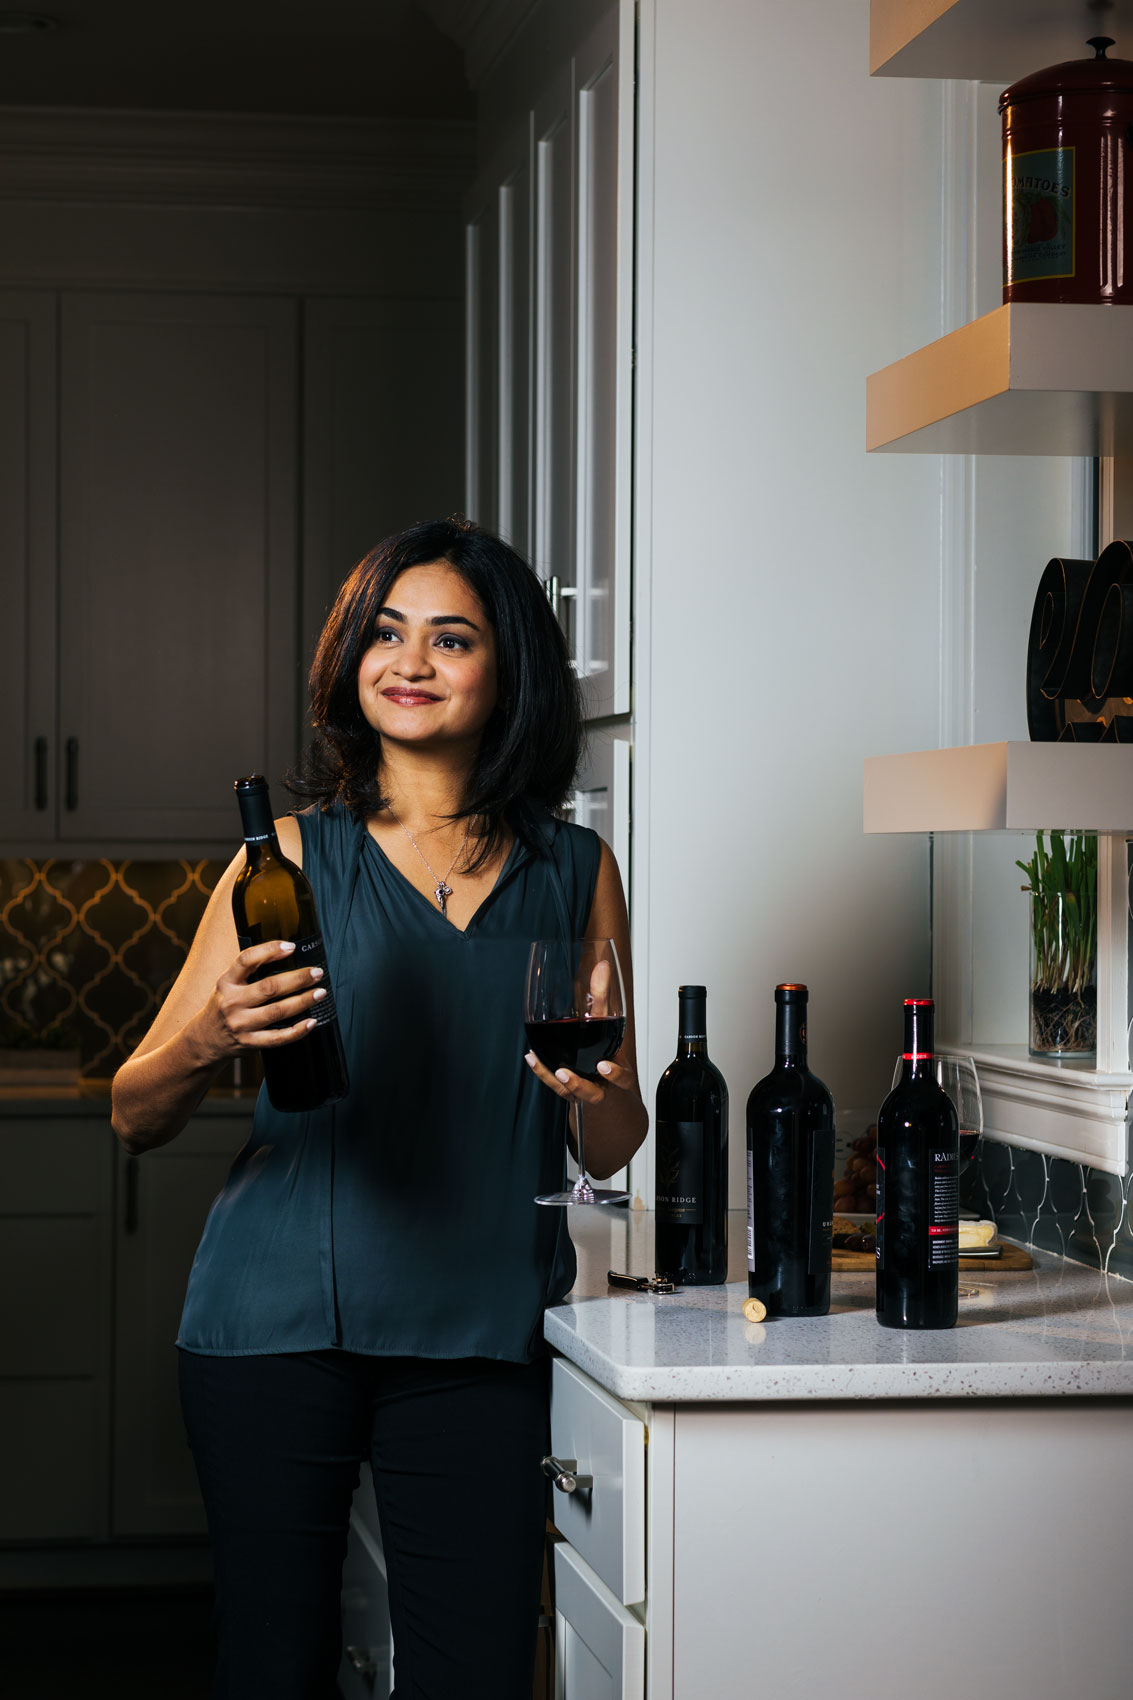 woman-holiding-bottle-of-wine-dc-commercial-photography-eli-meir-kaplan